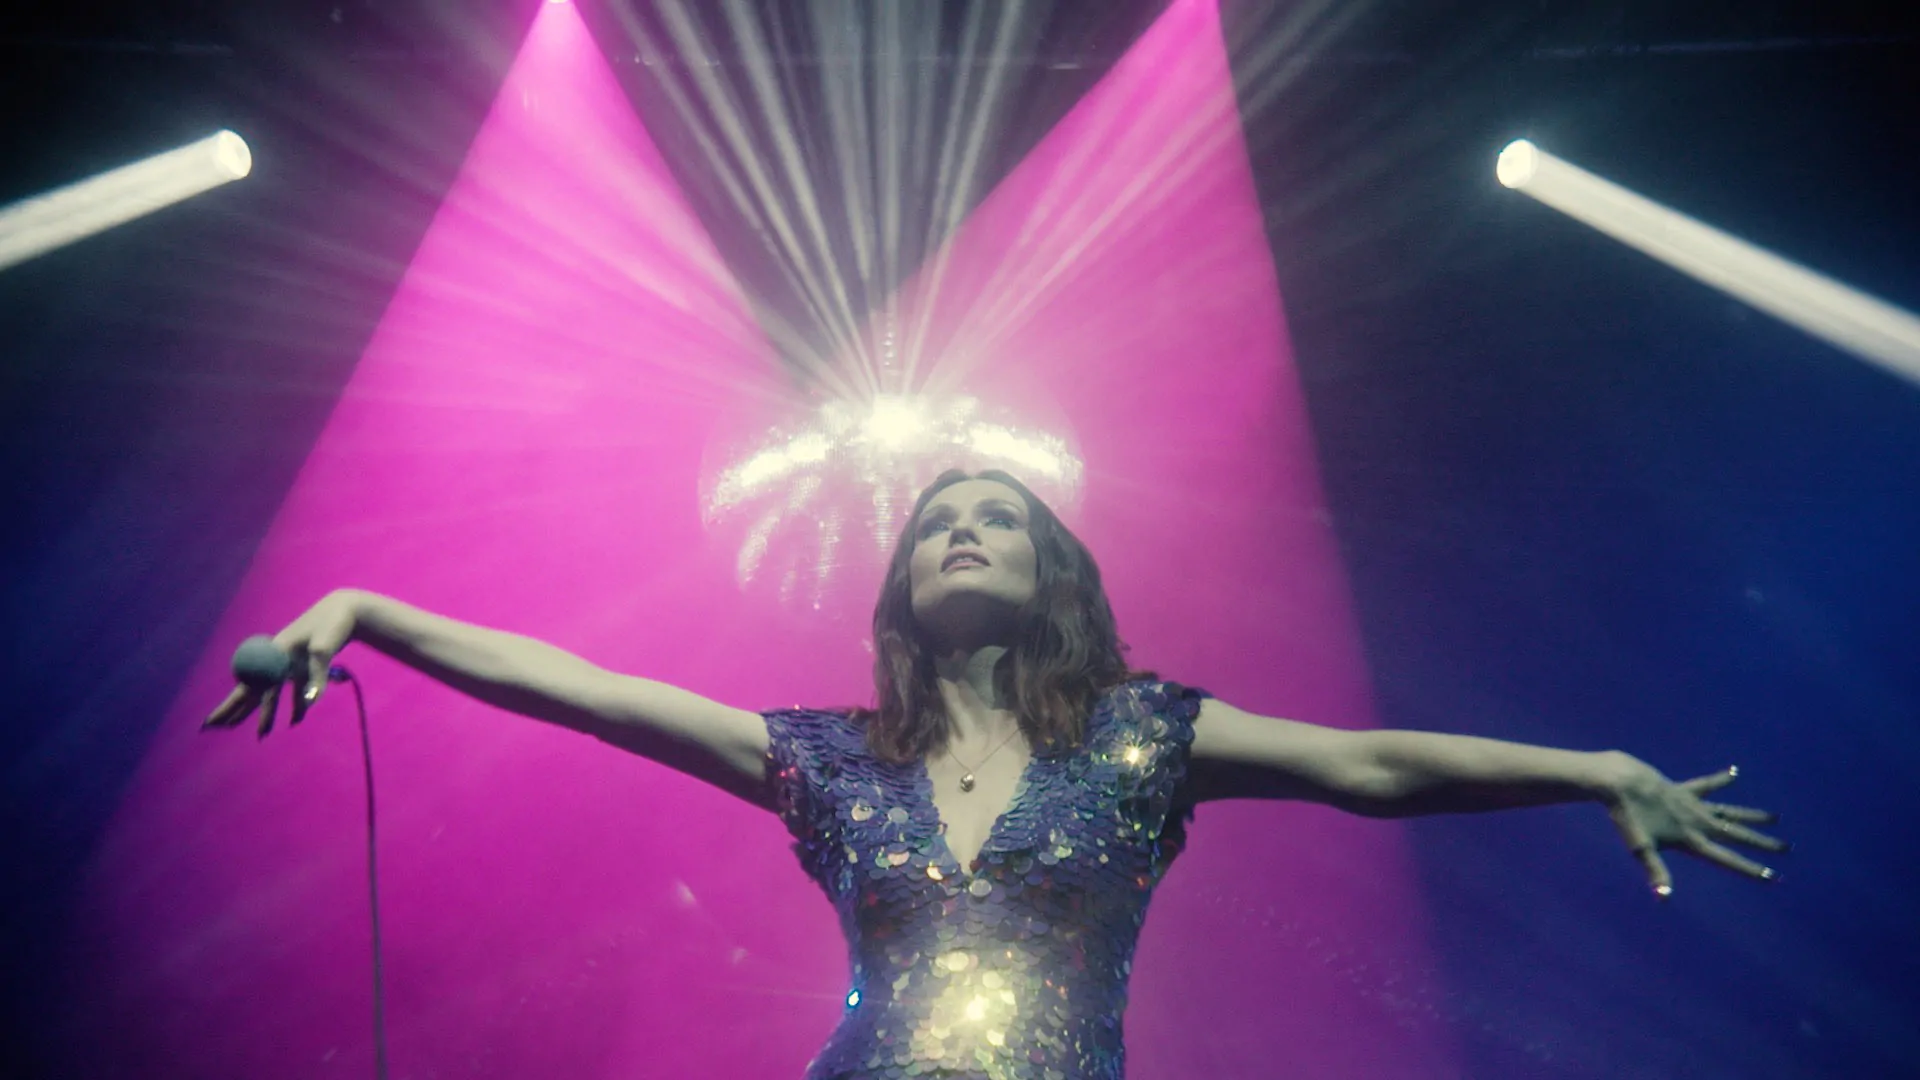 SOPHIE ELLIS-BEXTOR shares video for new single ‘Crying at the Discotheque’